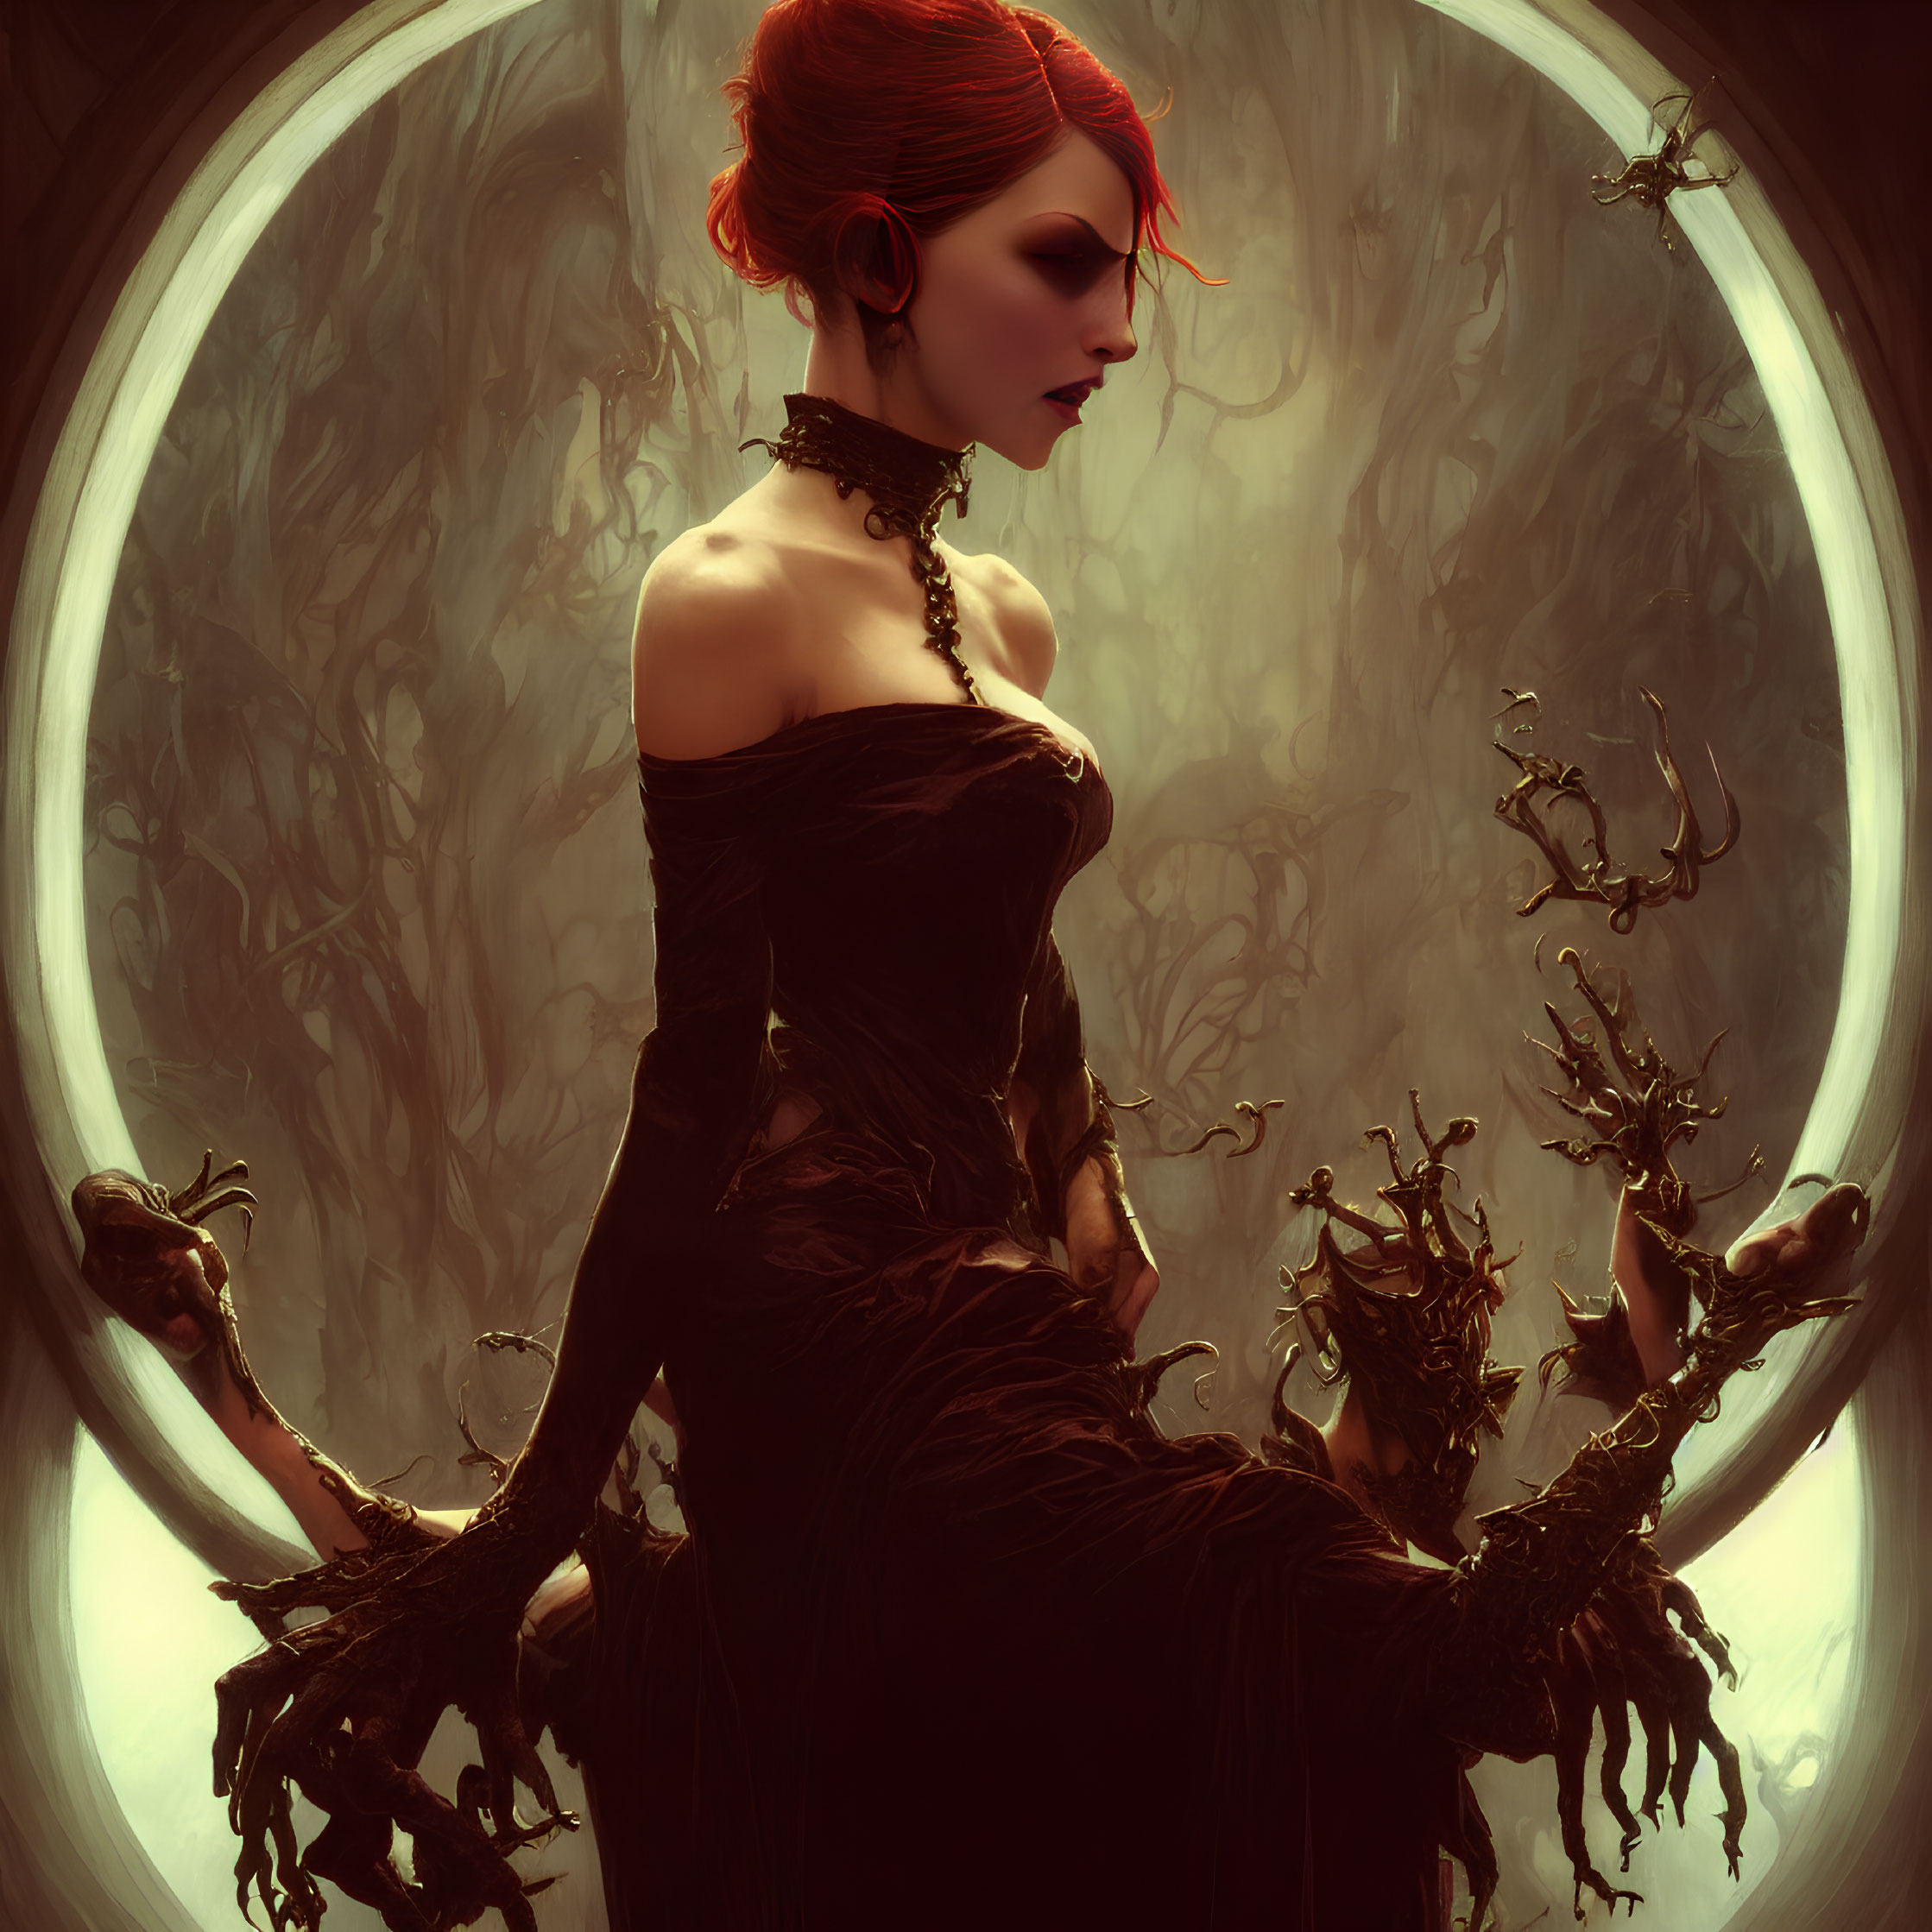 Red-haired woman in gothic dress surrounded by twisted tree branches.